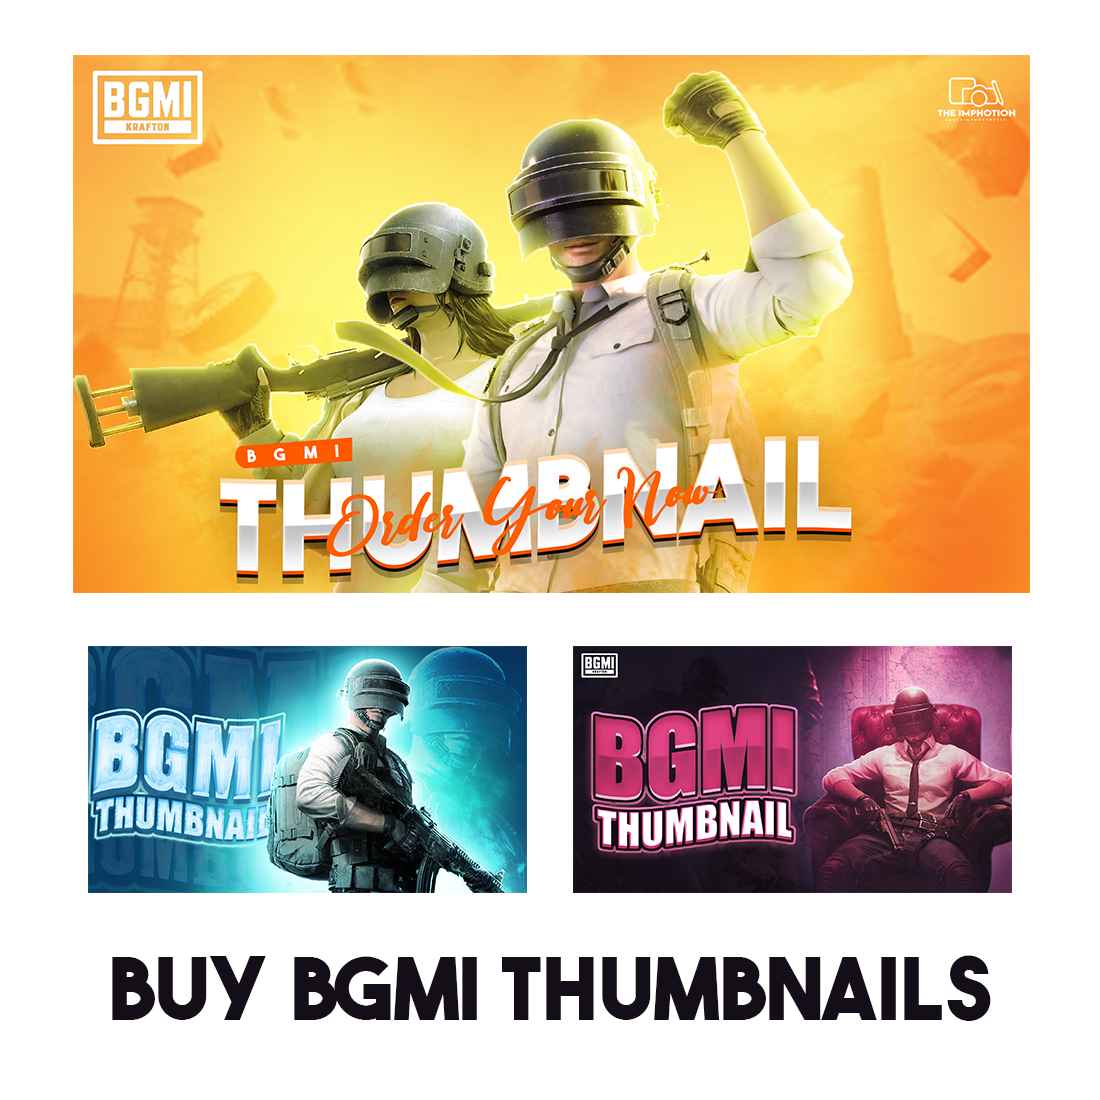 Pack Of 8 Bgmi Thumbnails With PSD Hier Me @imphotion cover image.